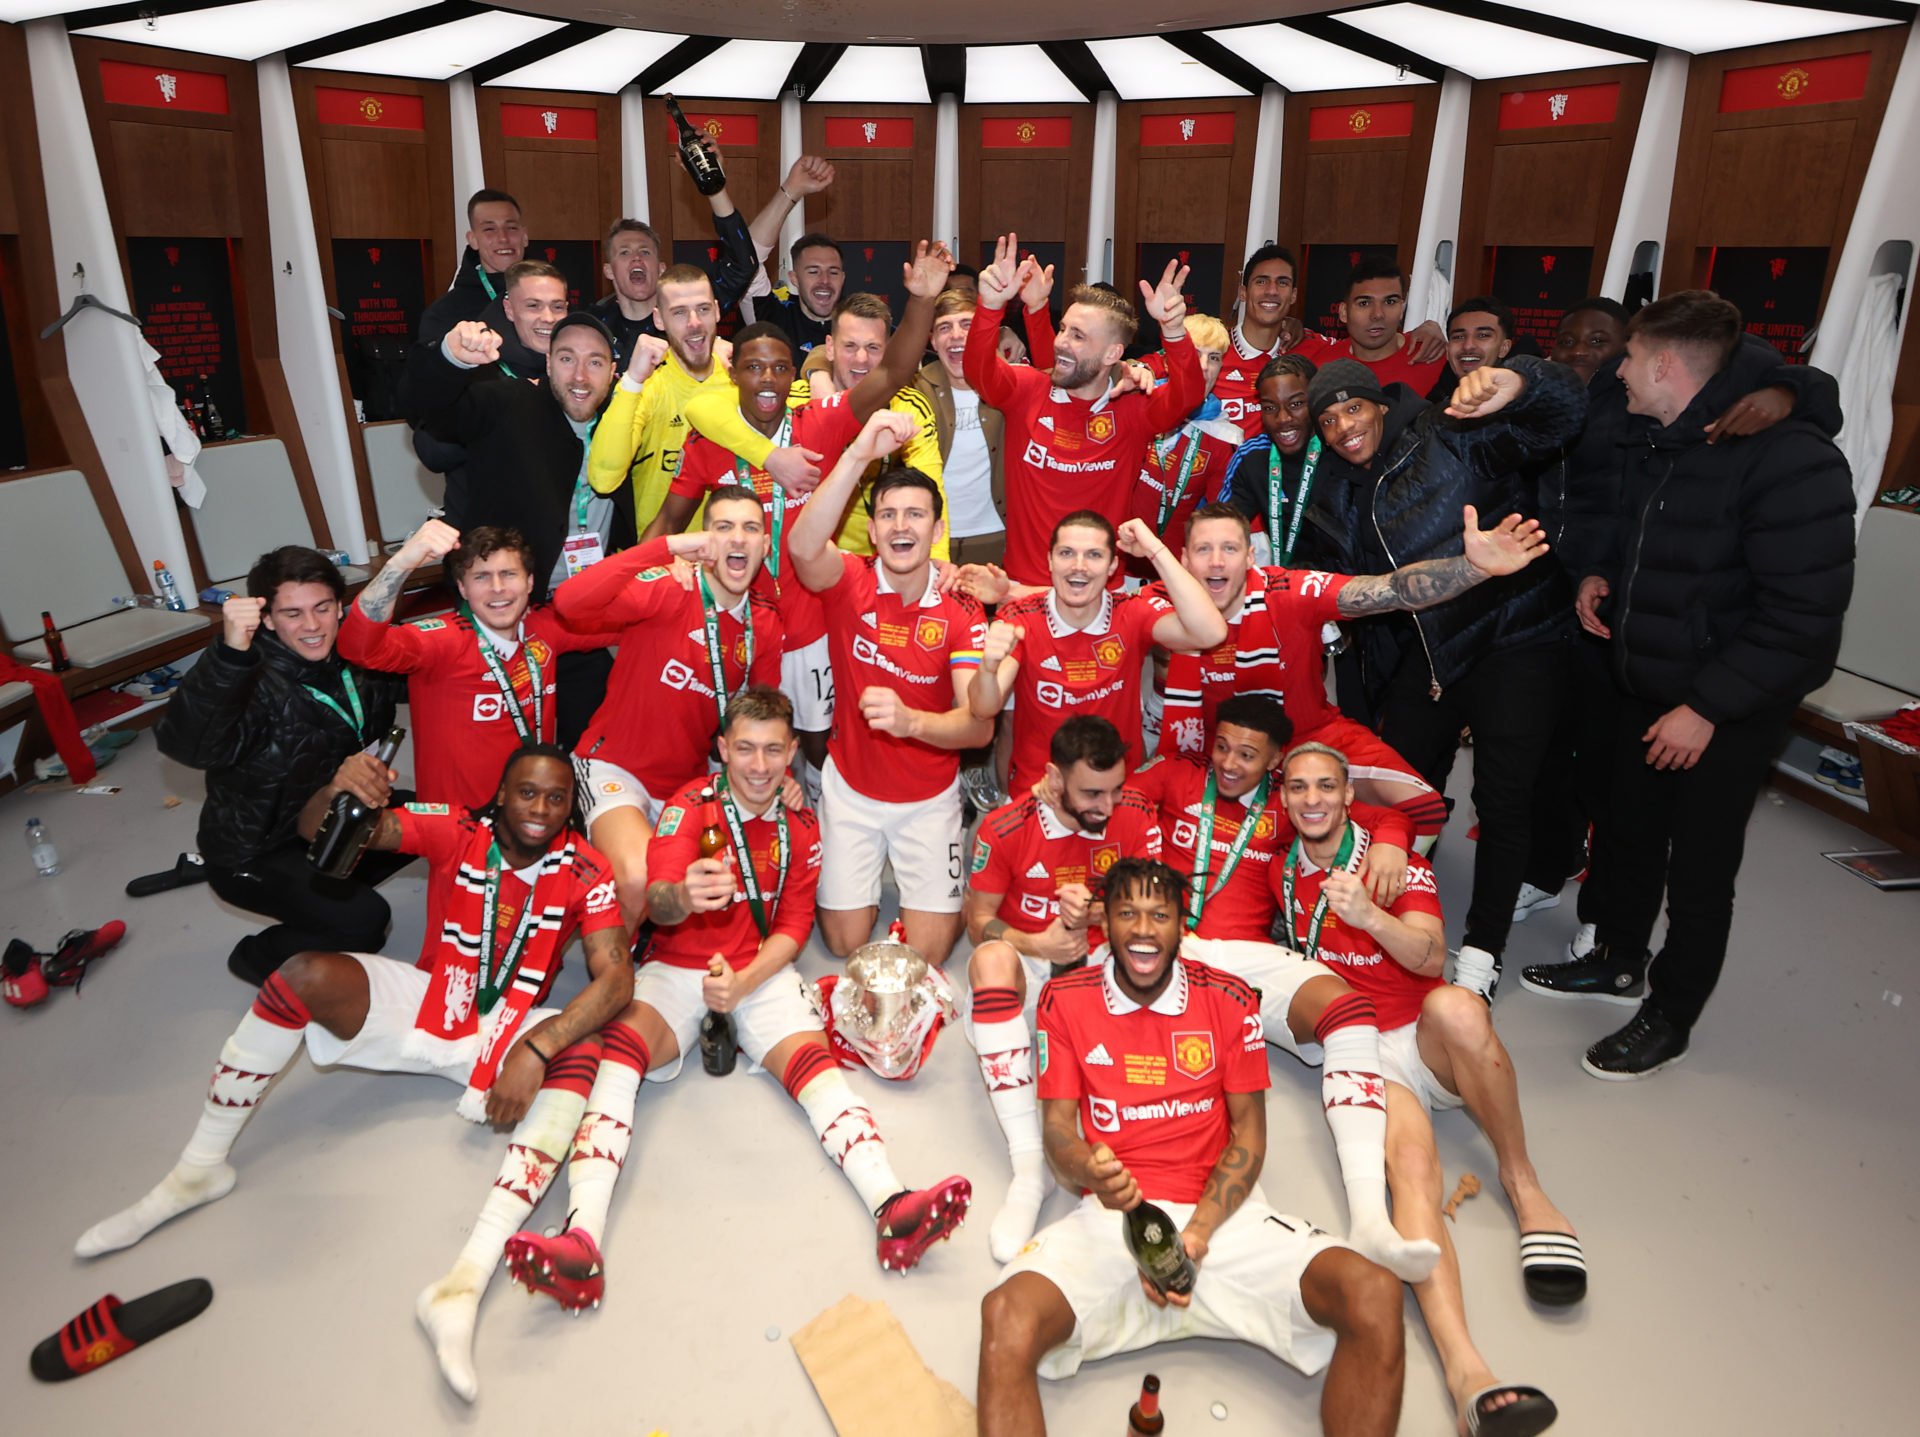 Man Utd's players dressing room pictures with Carabao Cup trophy